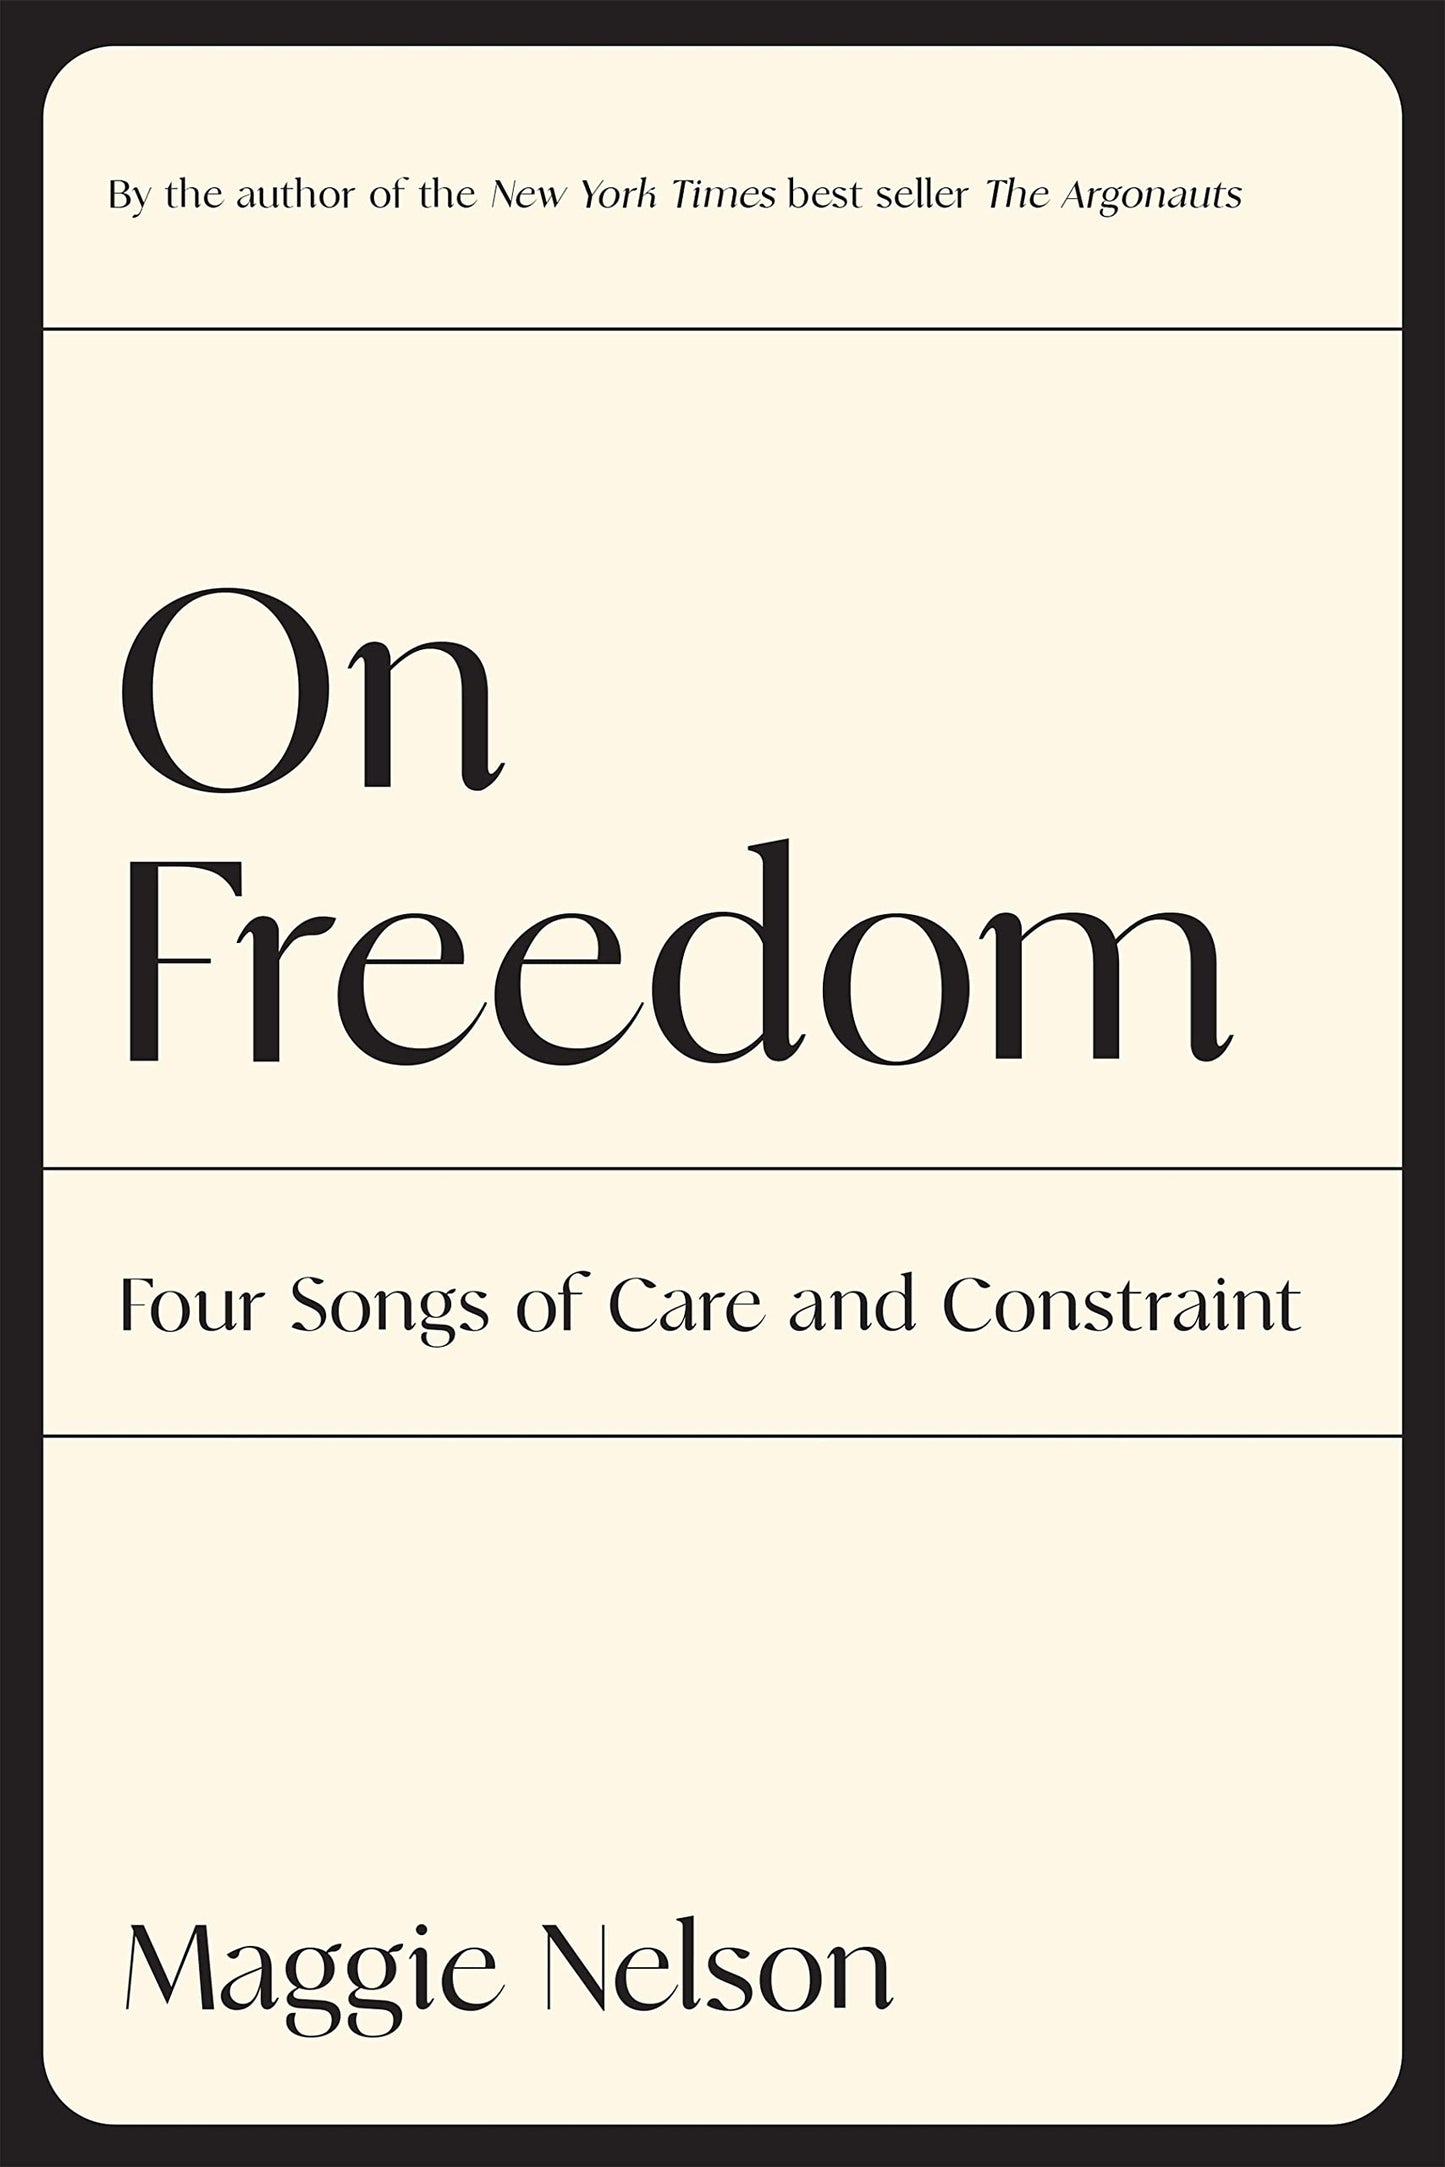 On Freedom: Four Songs of Care and Constraint, by Maggie Nelson